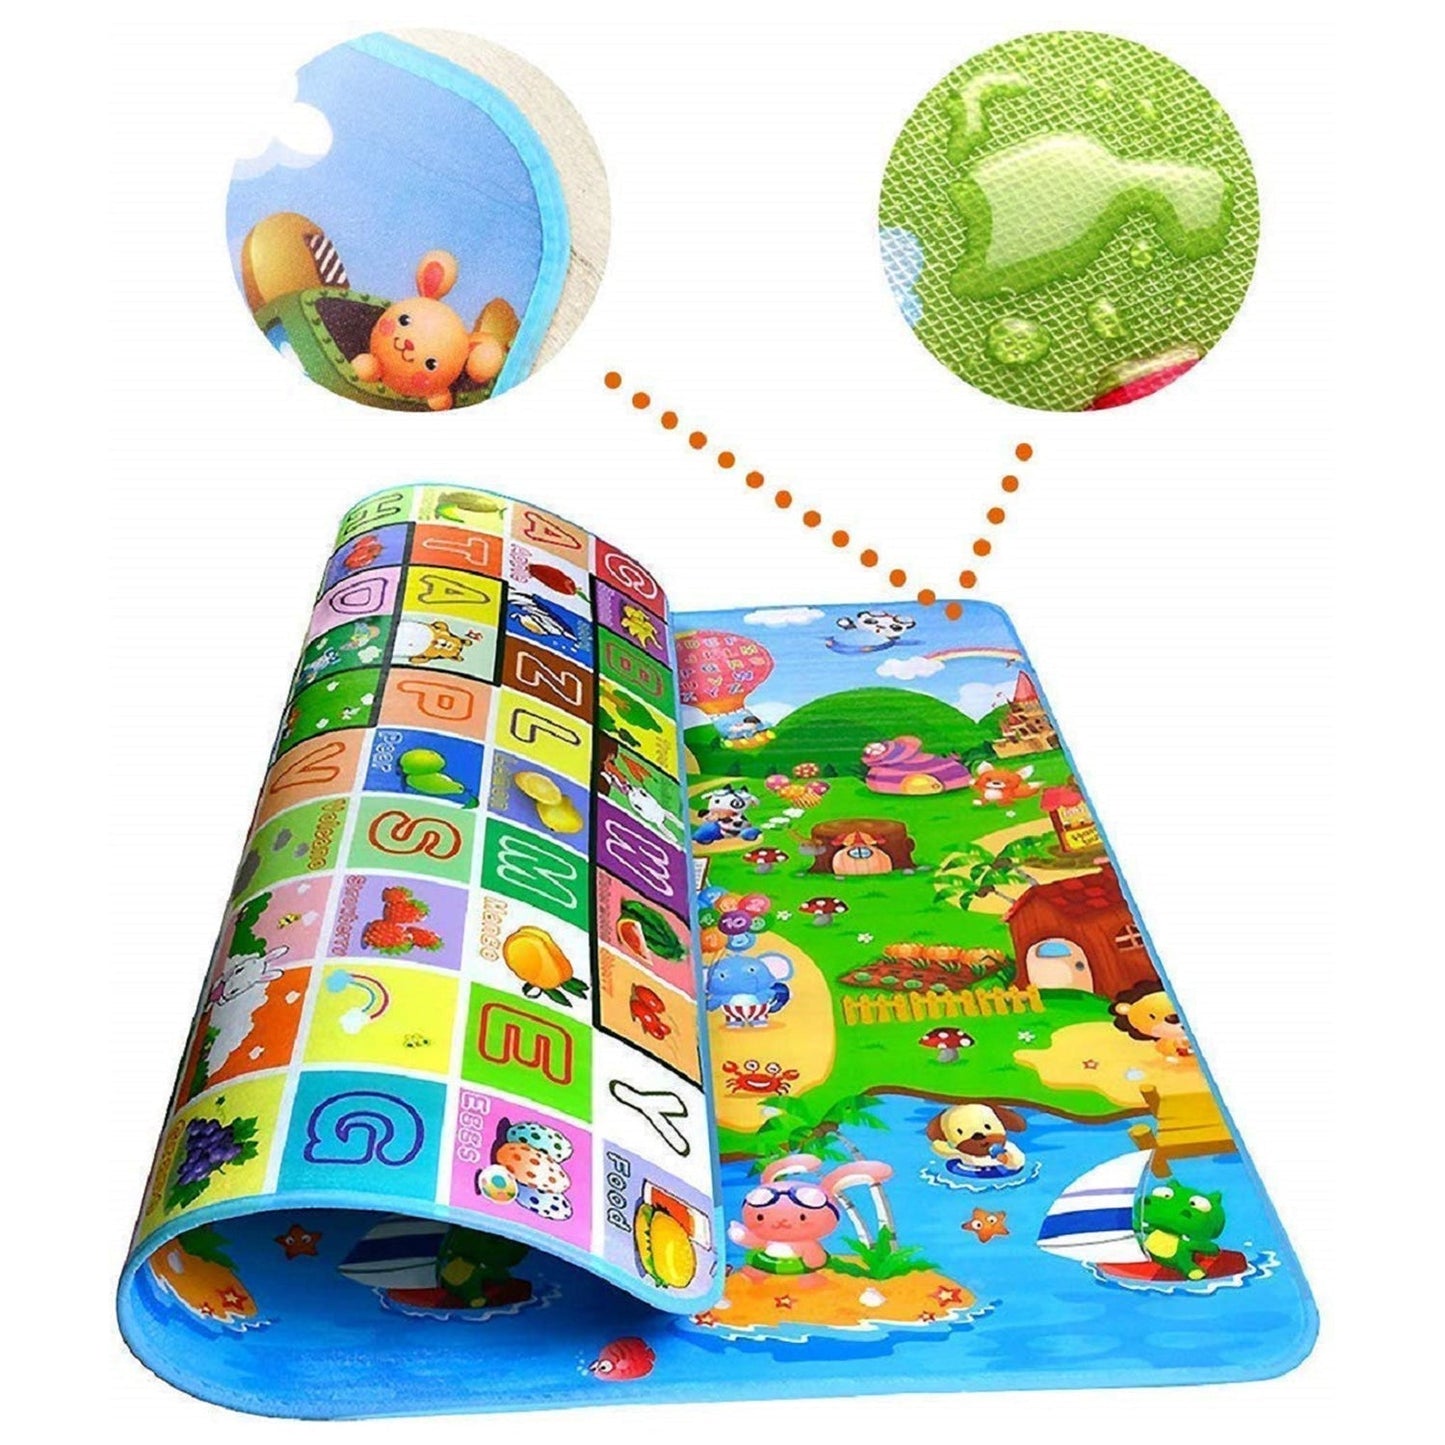 8059 Waterproof Double Side Baby Play Floor Mat for Kids Home With Bag (Size 120 x 180cm) 